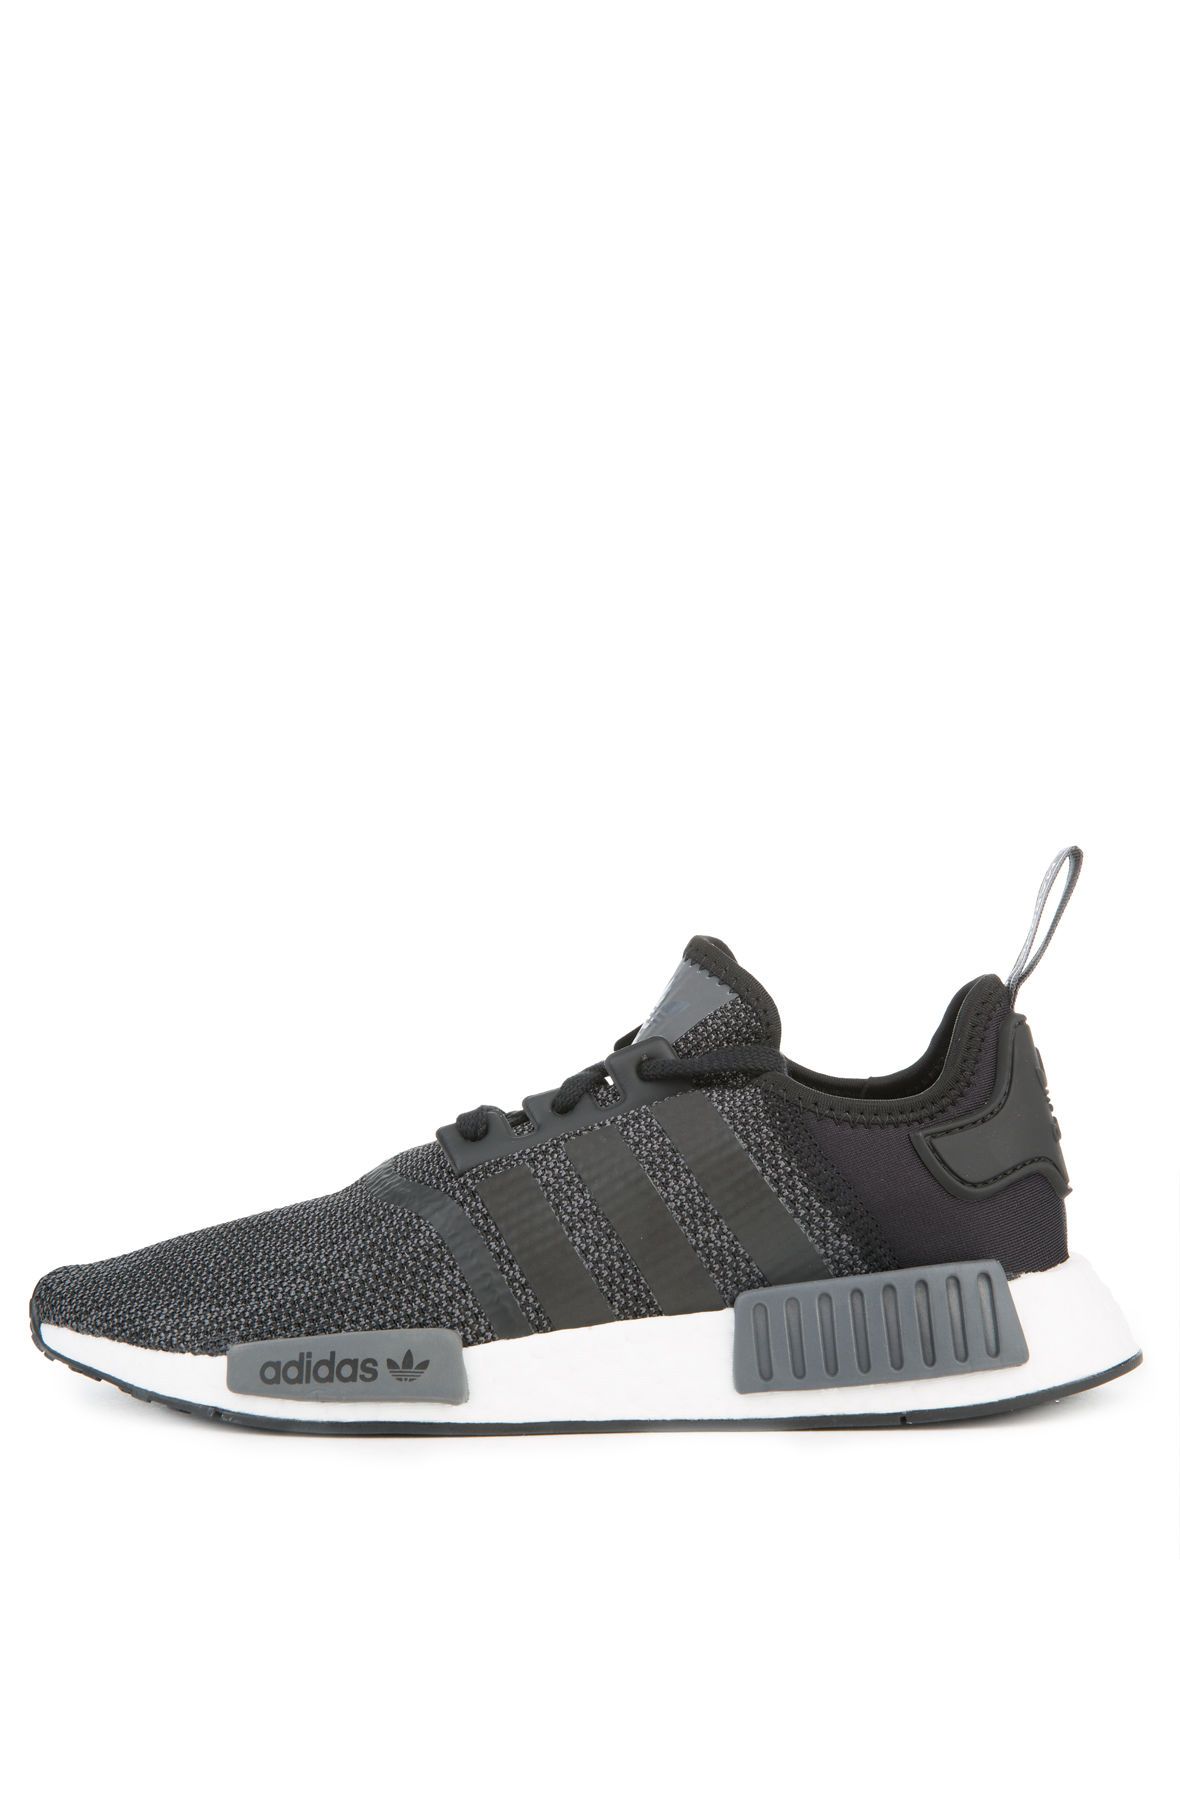 adidas NMD R1 by BEDWIN THE HEARTBREAKERS Worldbox